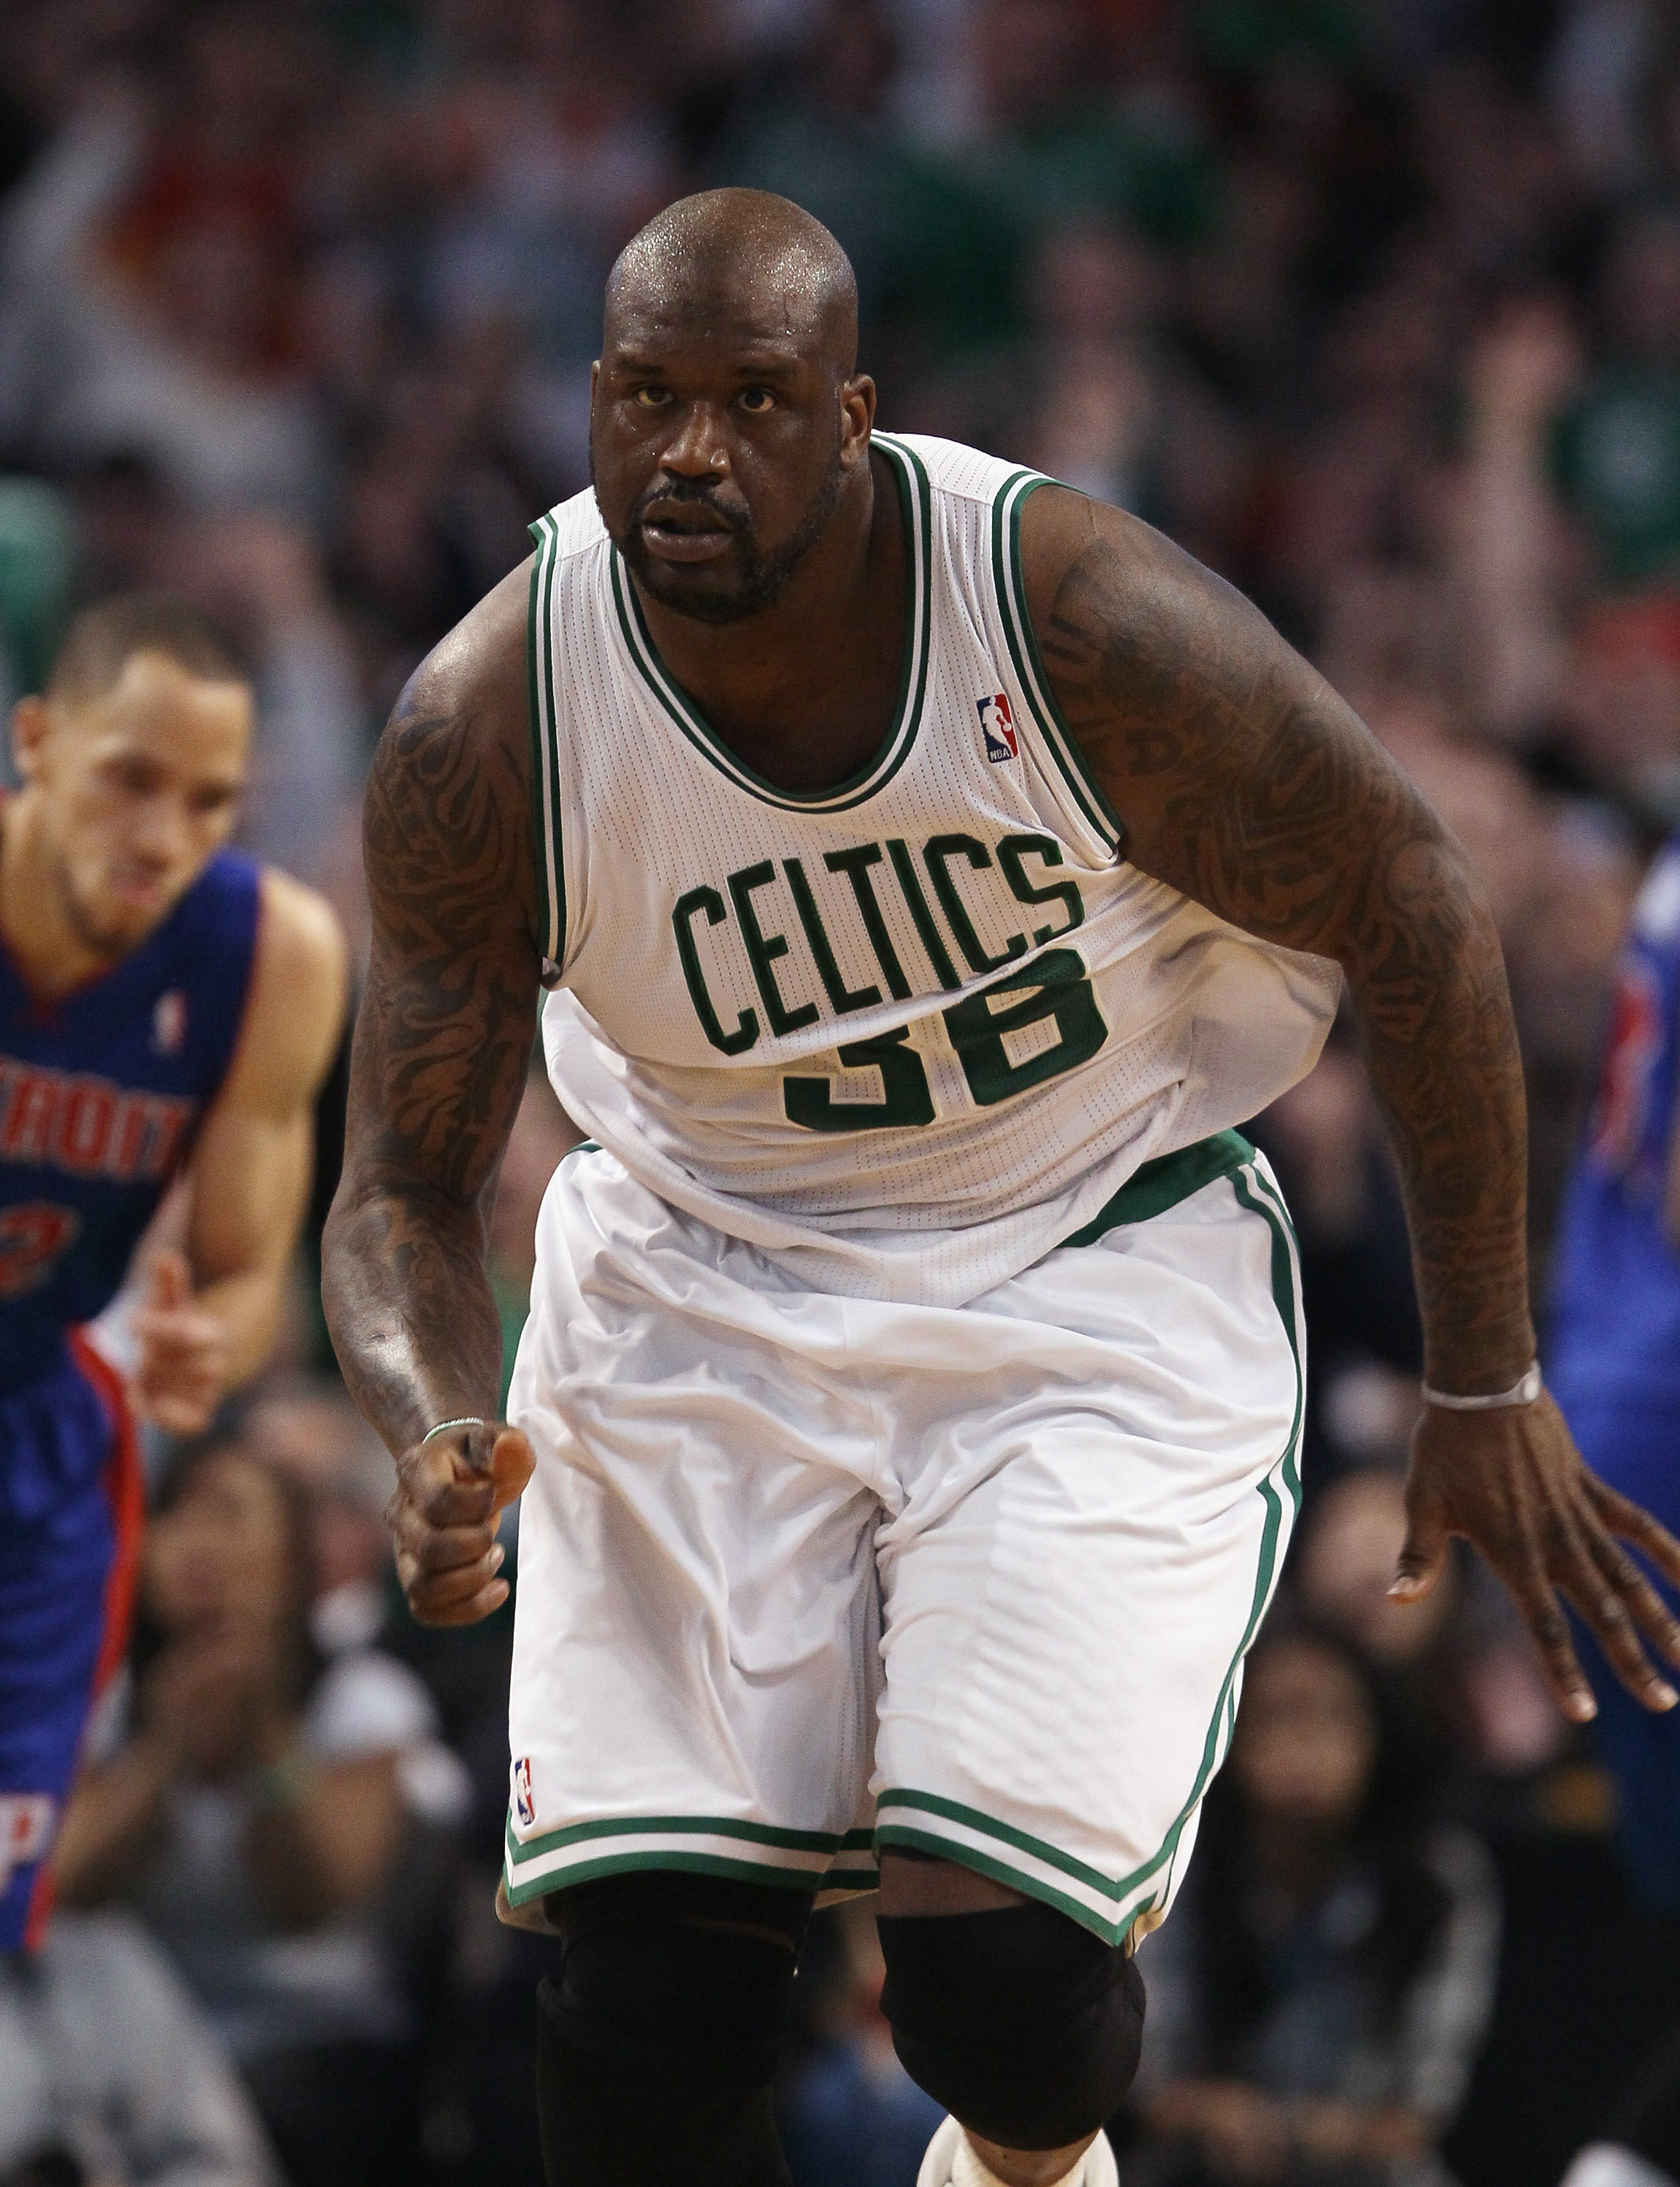 BOSTON, MA - JANUARY 19:  Shaquille O'Neal #36 of the Boston Celtics celebrates in the fourth quarter against the Detroit Pistons on January 19, 2011 at the TD Garden in Boston, Massachusetts. The Celtics defeated the Pistons 86-82. NOTE TO USER: User exp